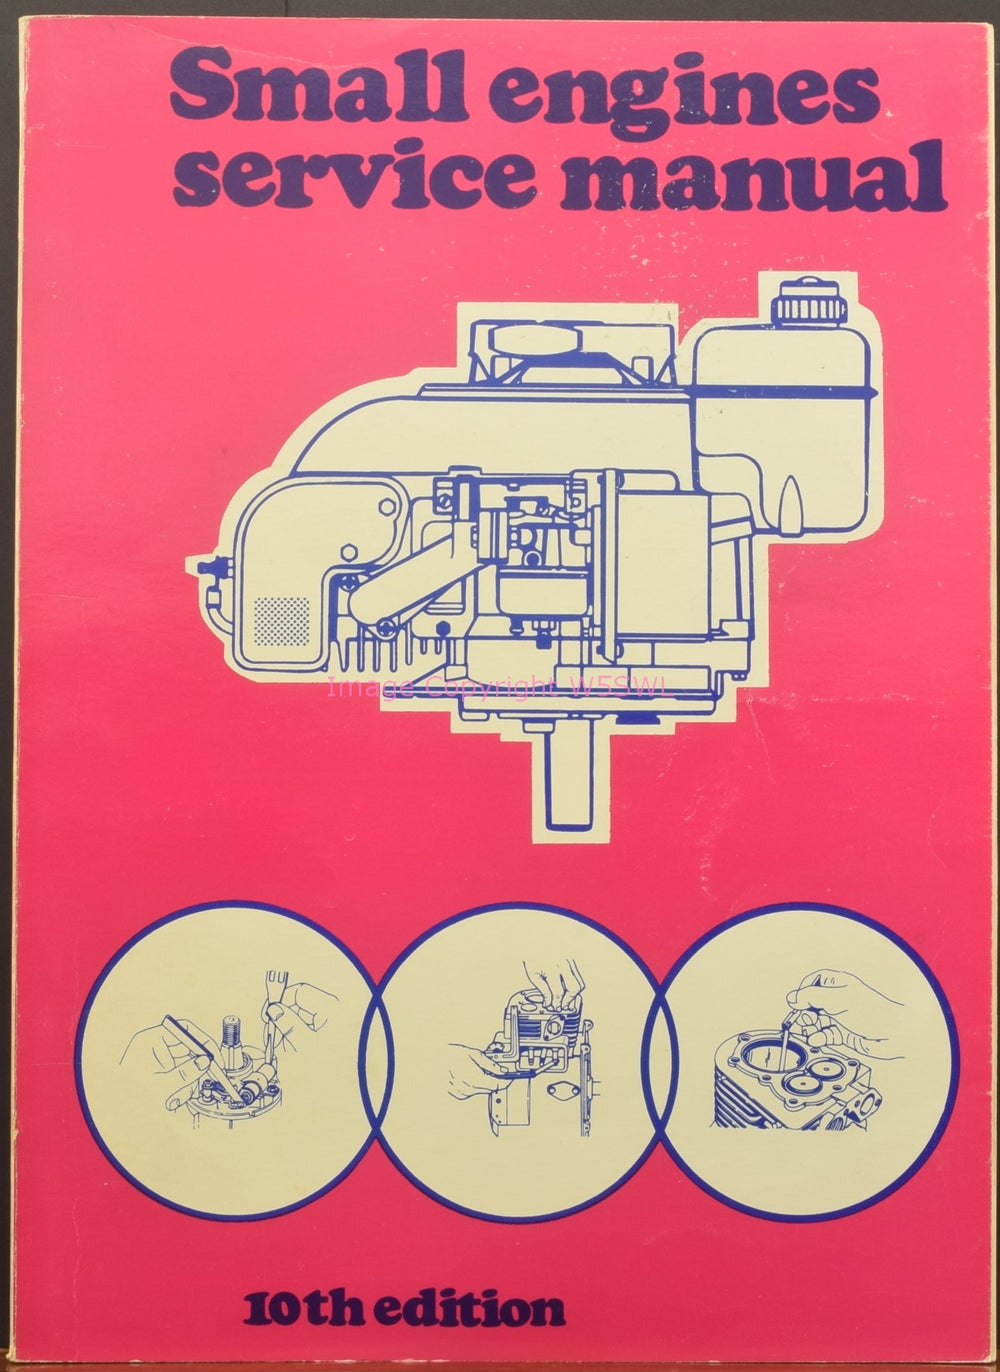 Small Engines Service Manual 10th Edition - Dave's Hobby Shop by W5SWL